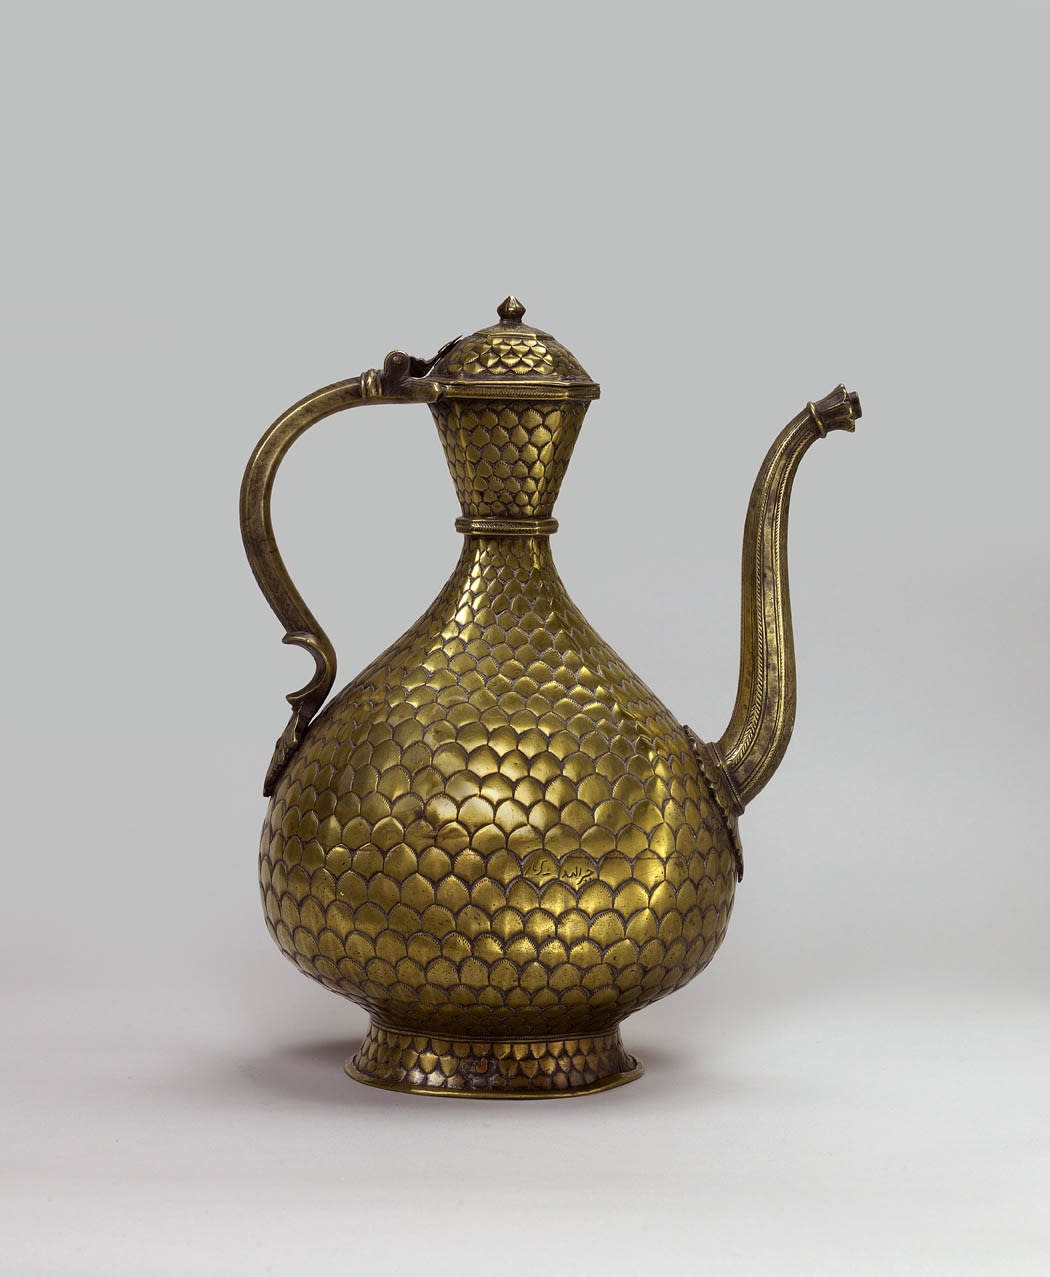 Brass Ewer with engraved Fish Scale Pattern, Deccan, early 18th century